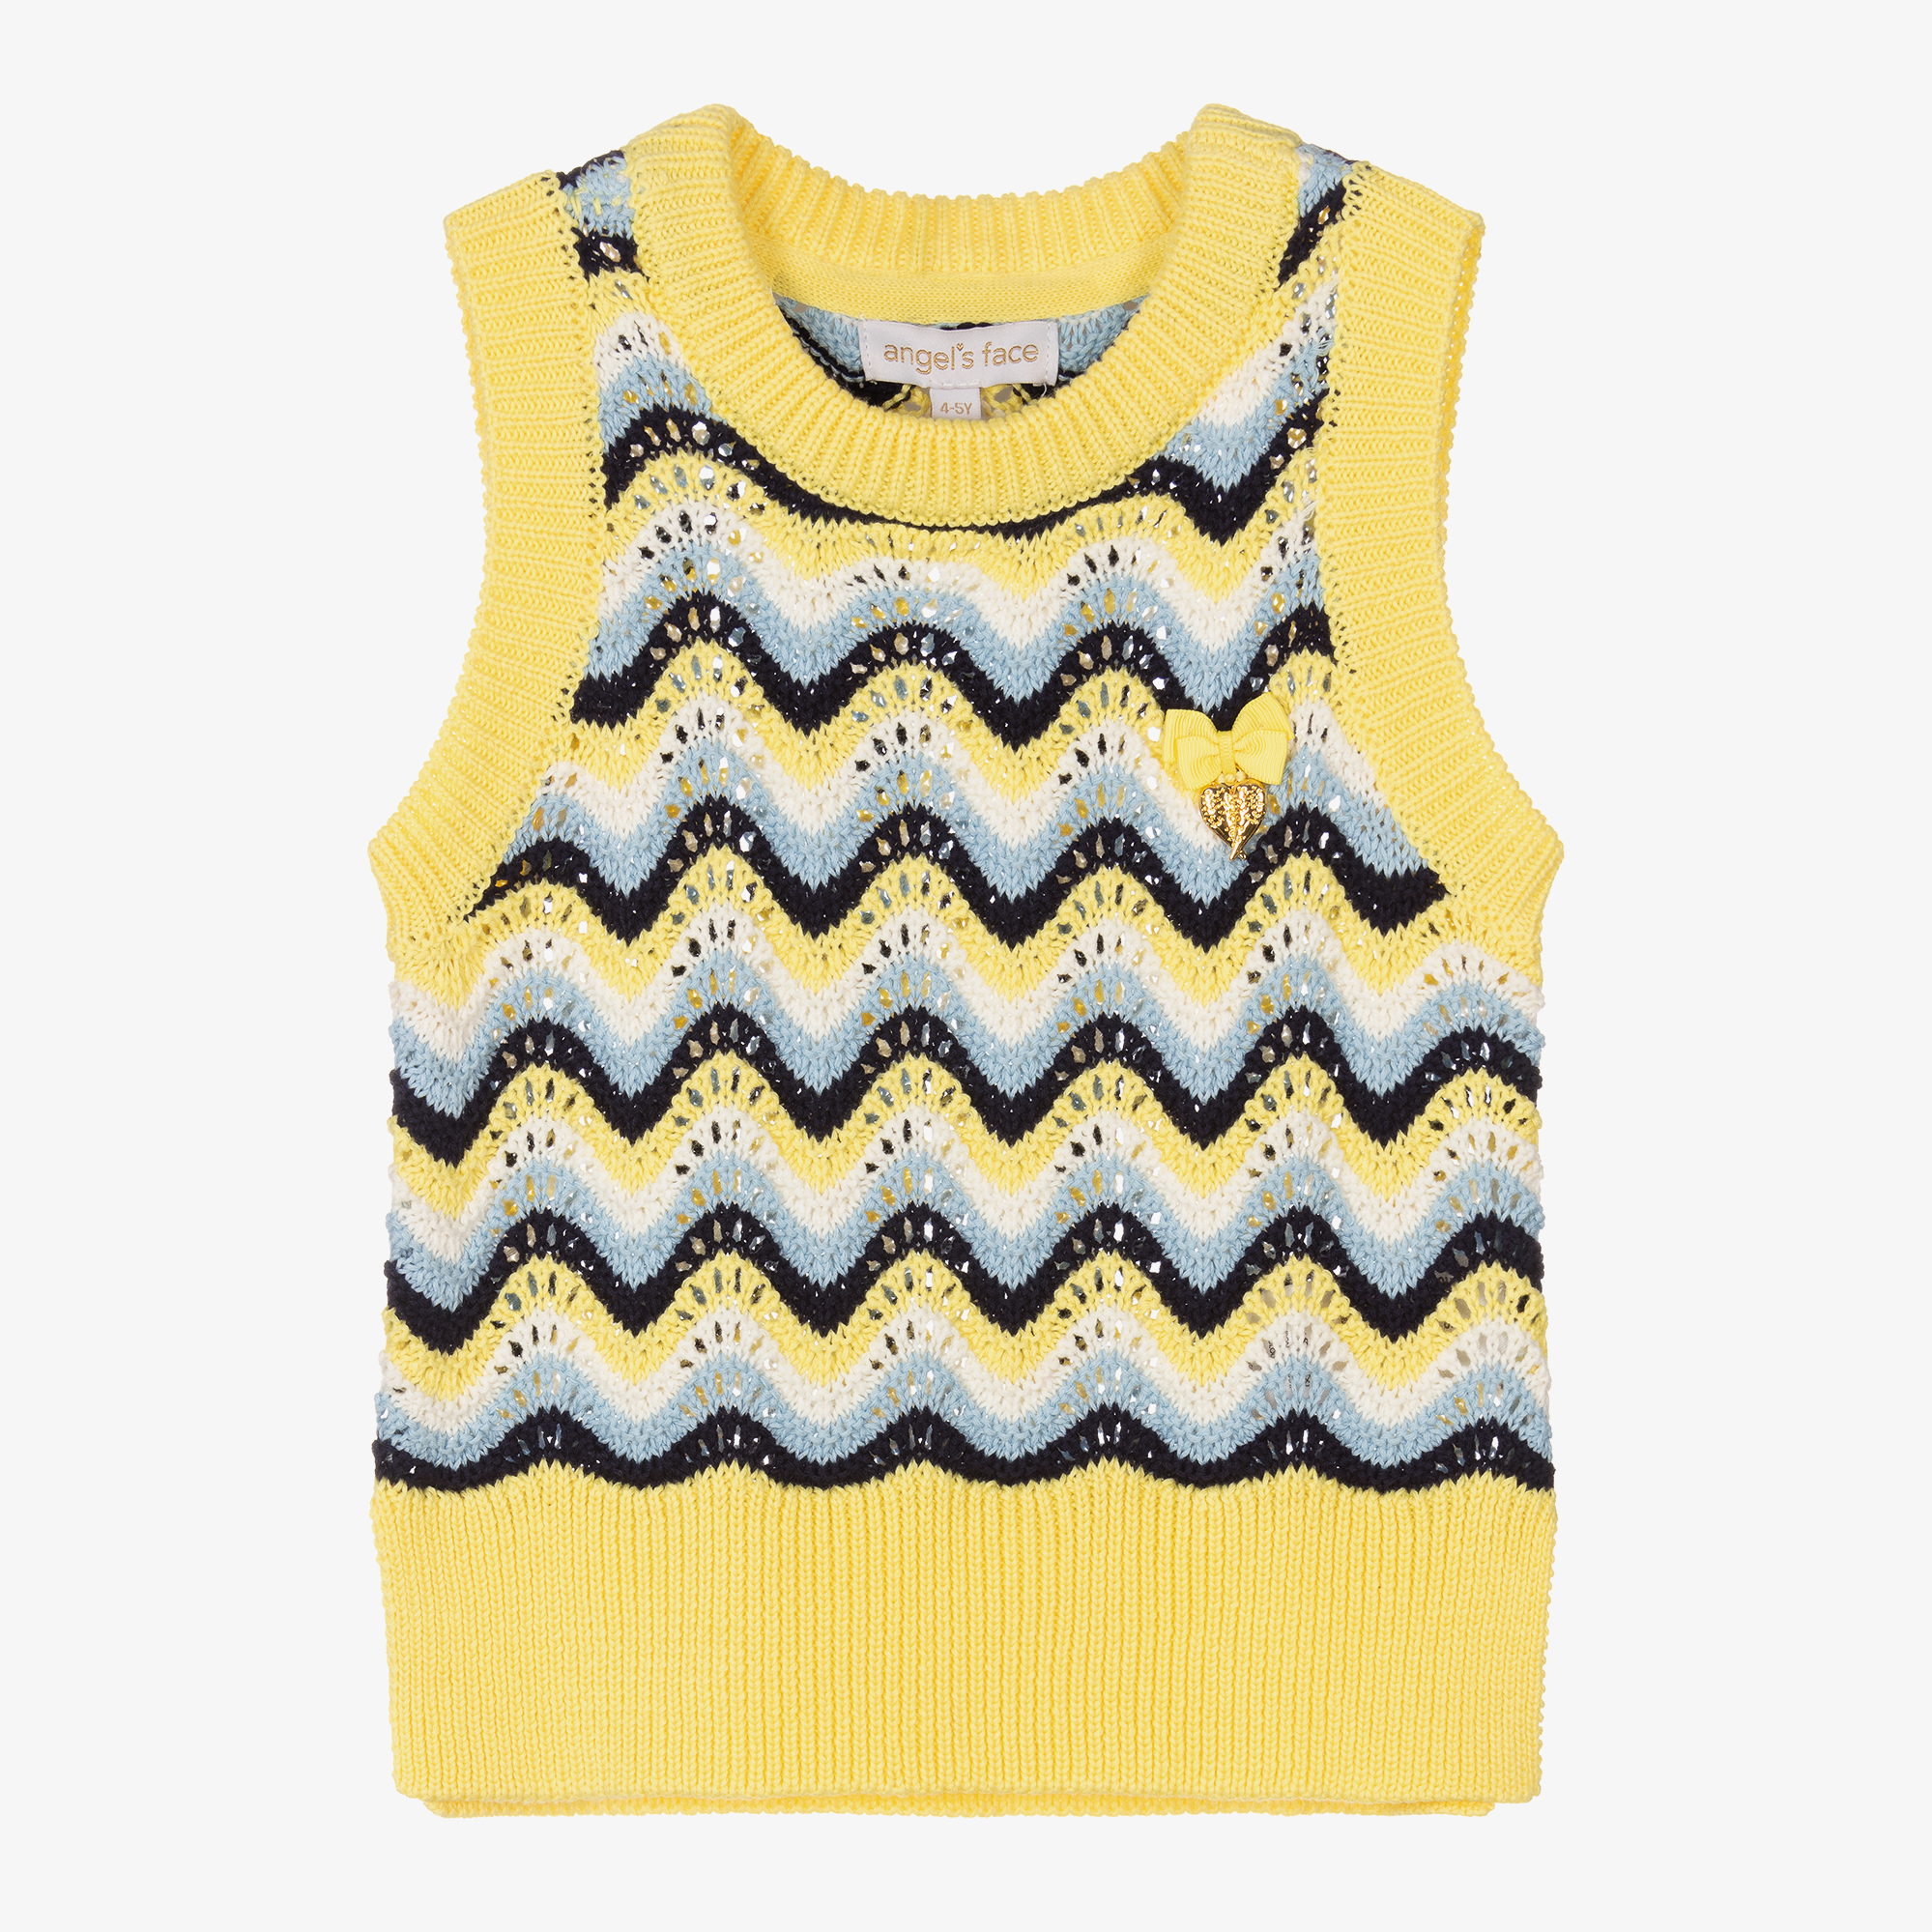 Angel's Face - Girls Yellow & Blue Knitted Sweater Vest